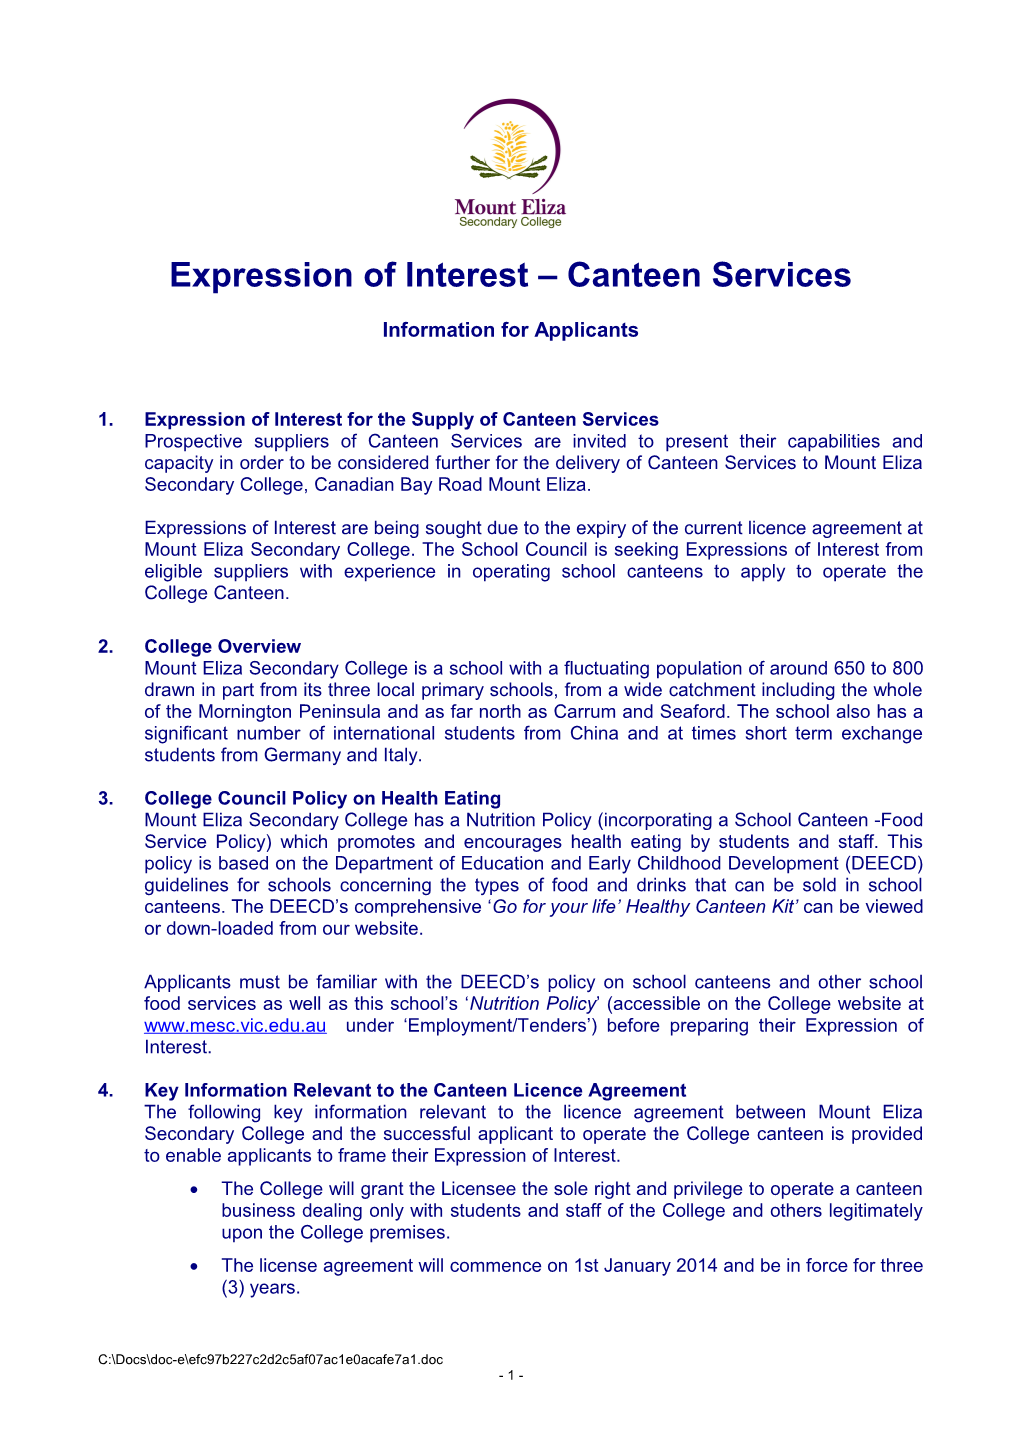 Expression of Interest Canteen Services